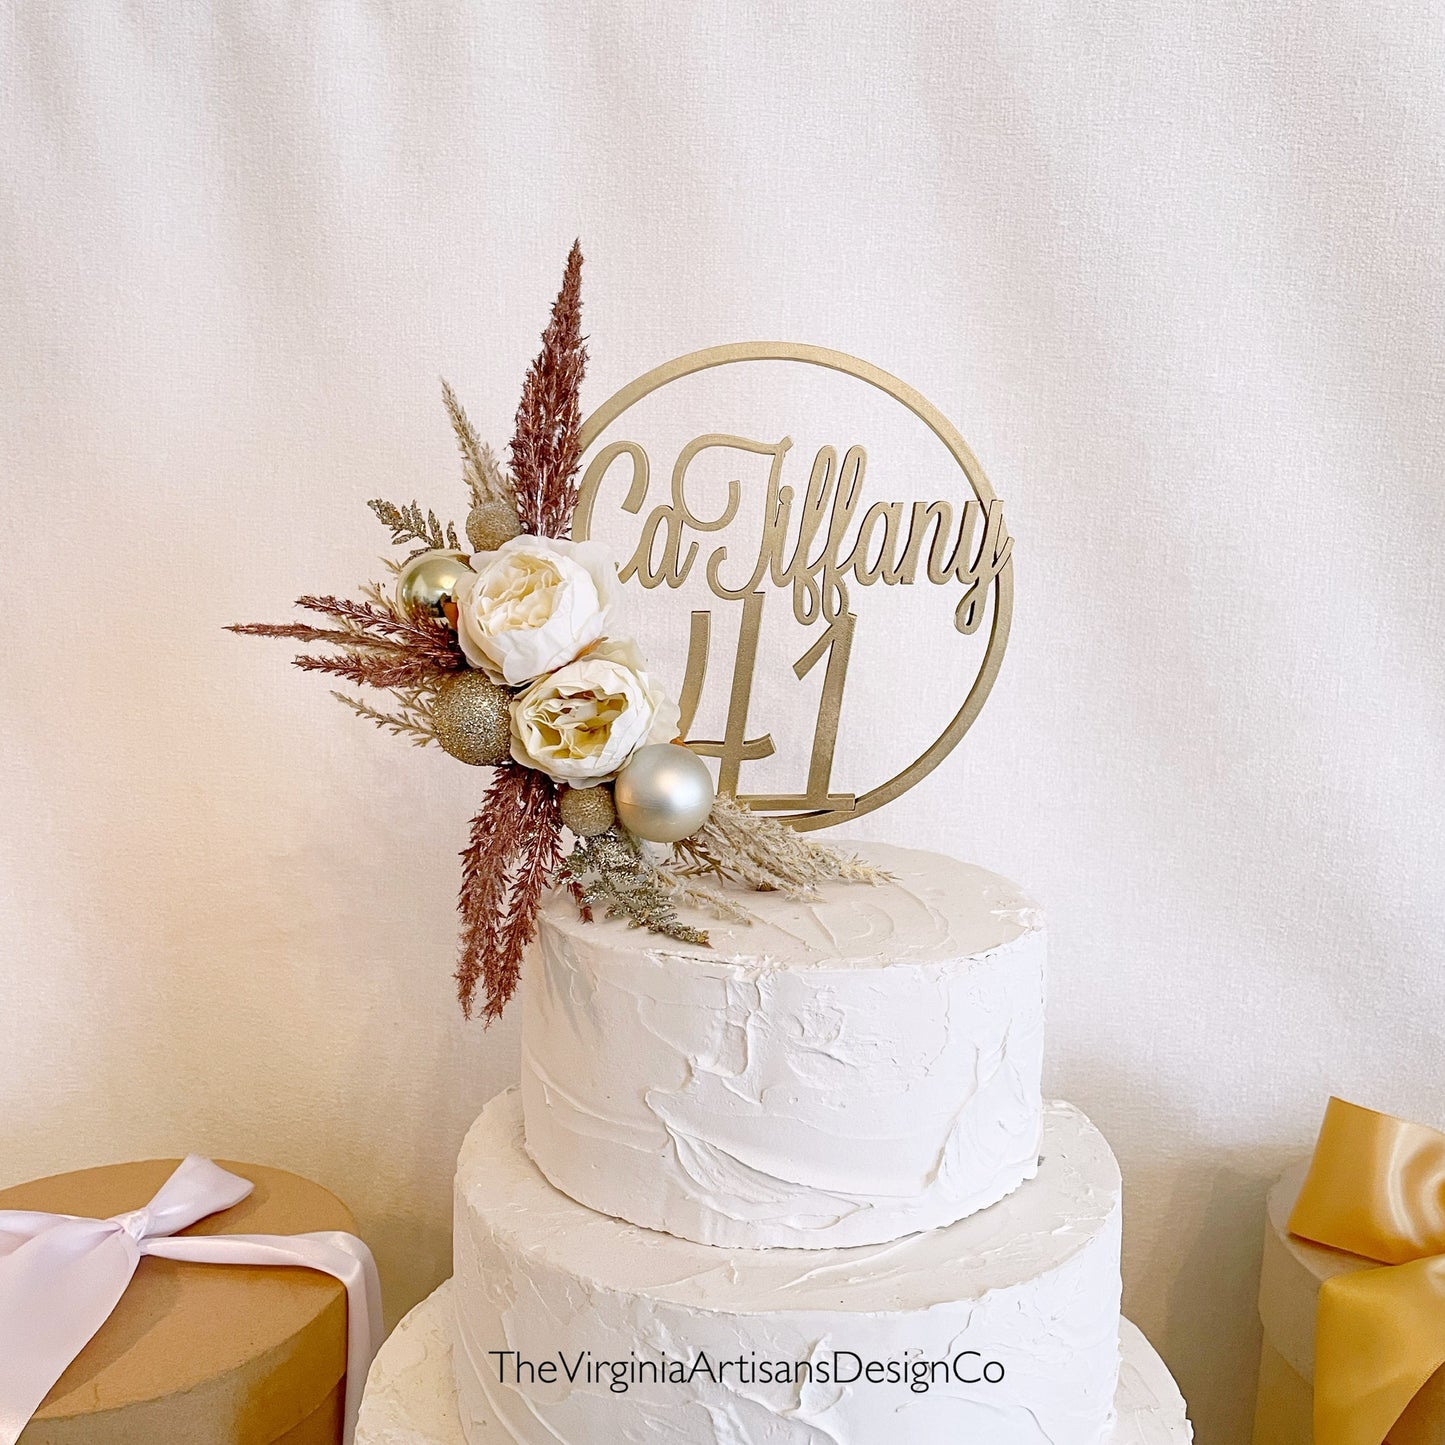 Personalized Birthday Cake Topper with Number and dried flowers - Cream, Silver and Copper Theme